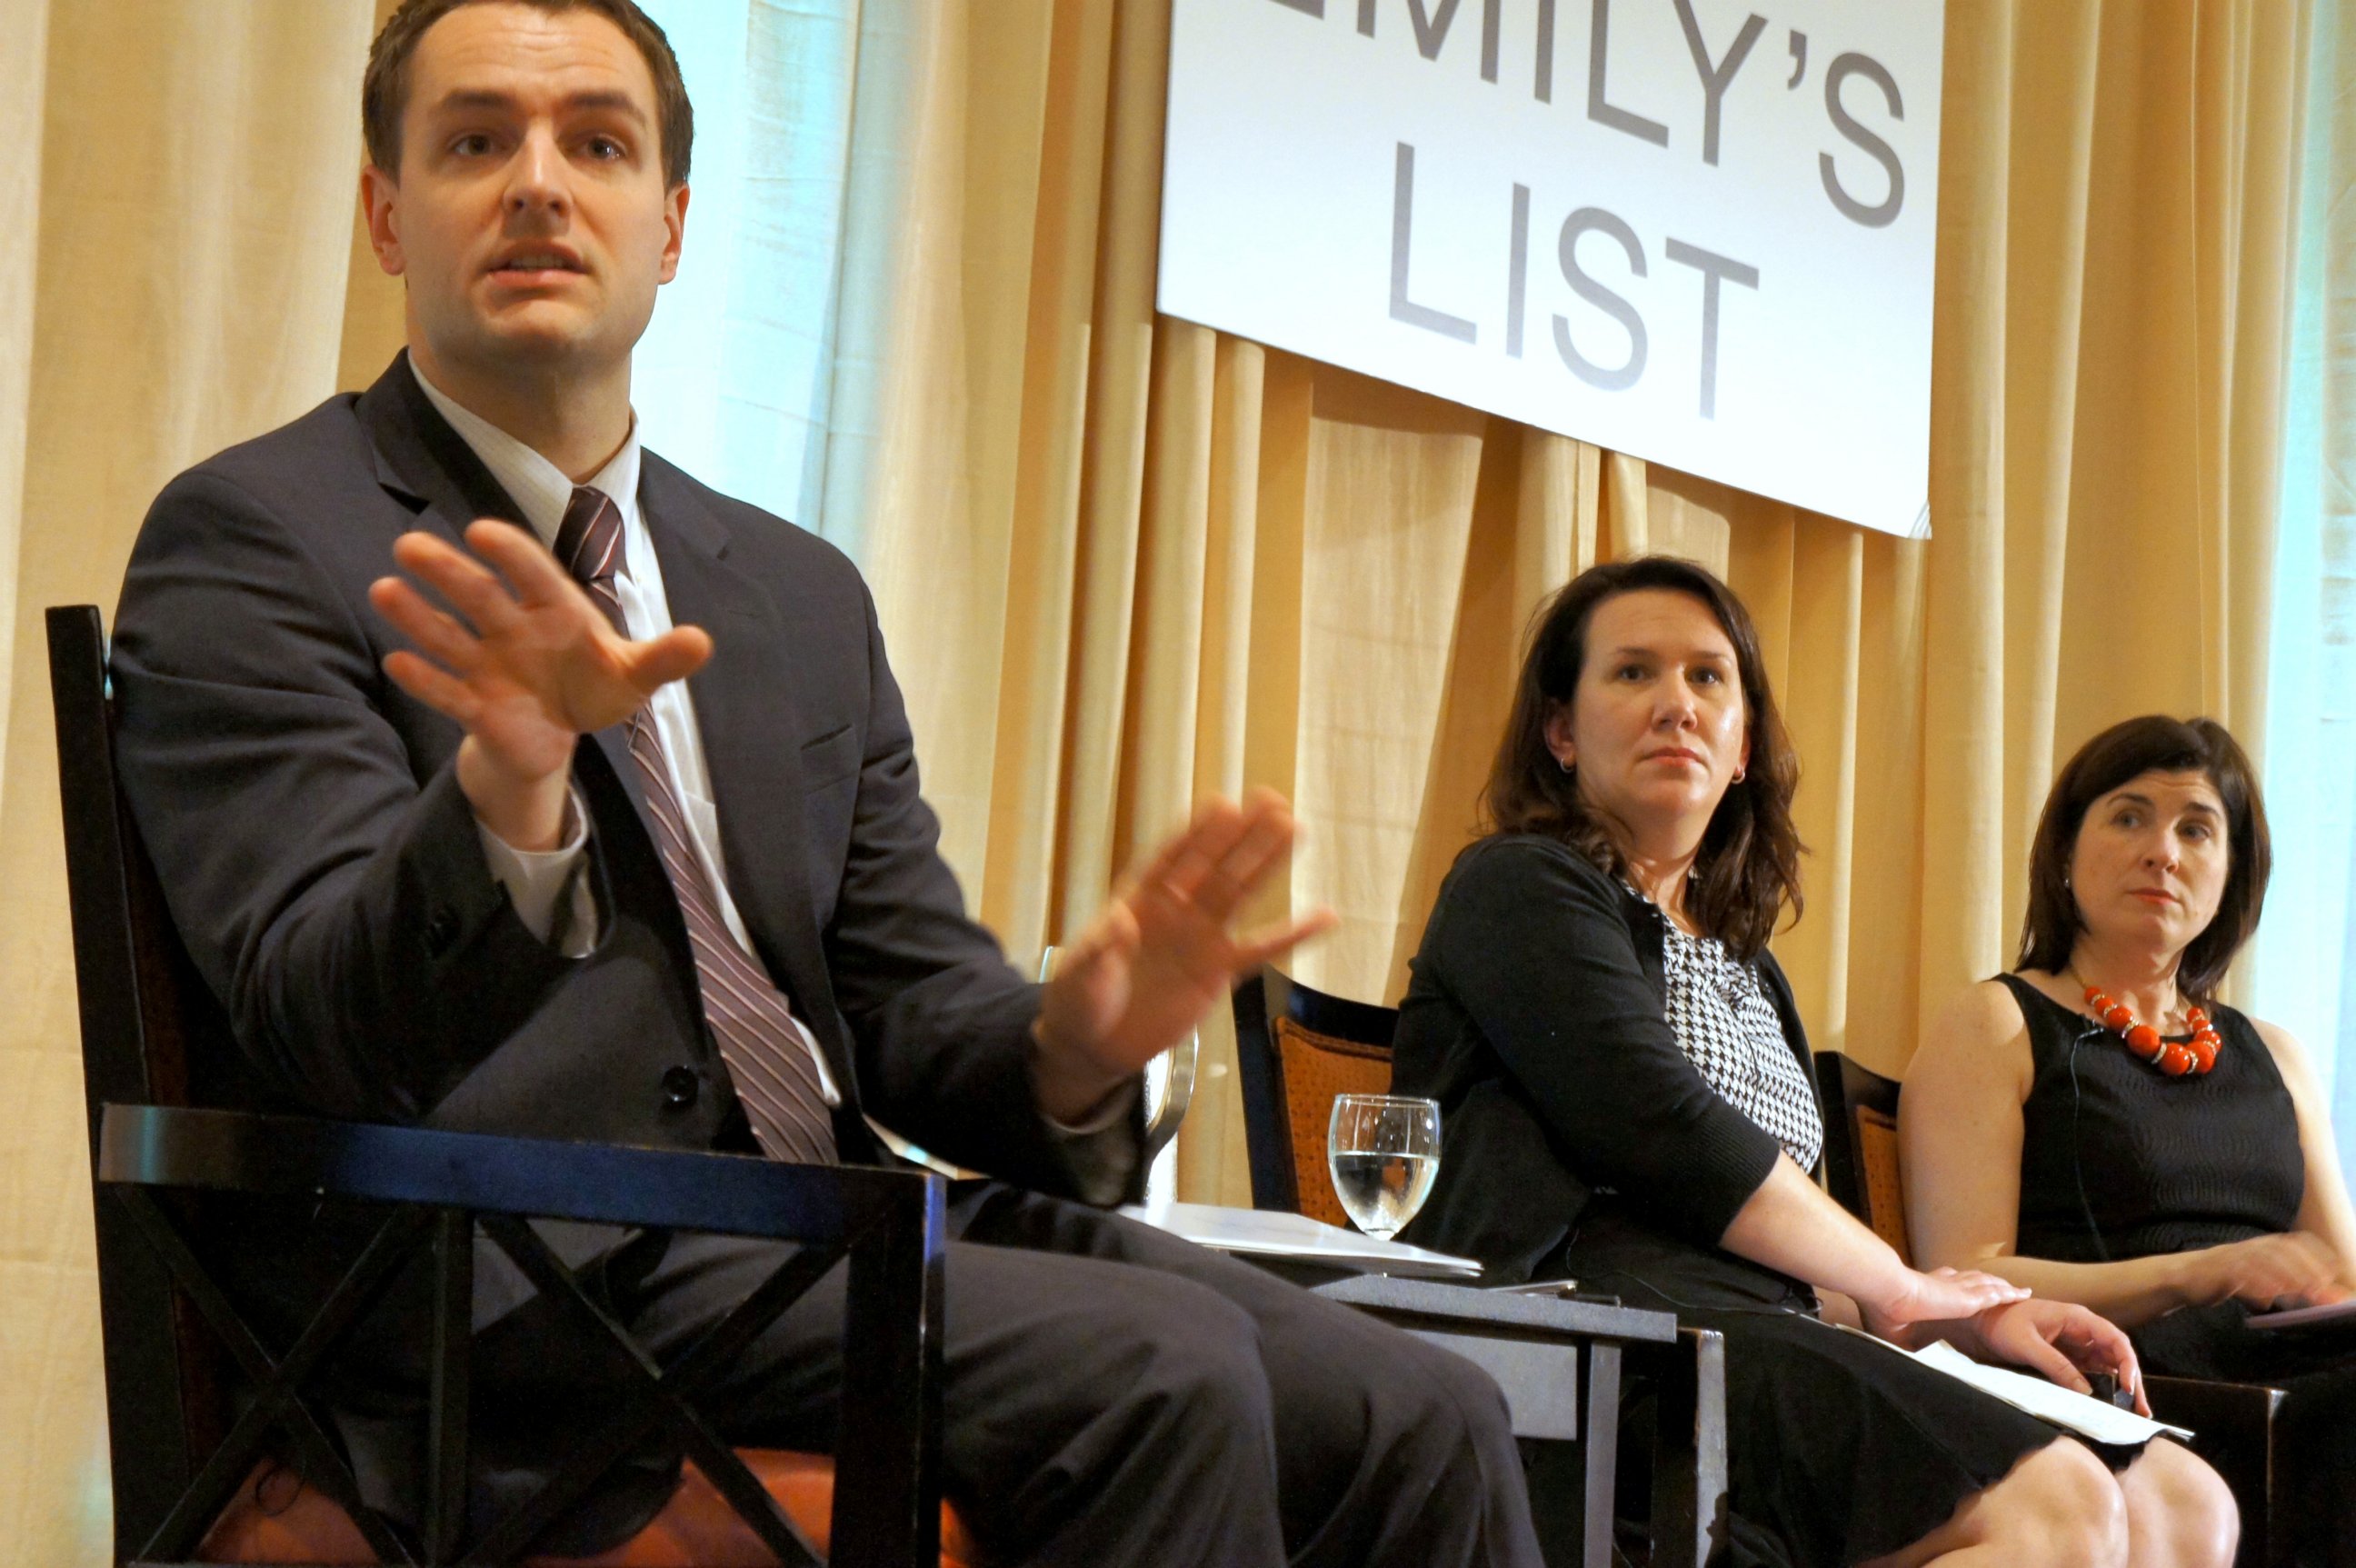 PHOTO: DCCC's Robby Mook speaks with members of Emily's List in this Oct. 25, 2010 file photo.